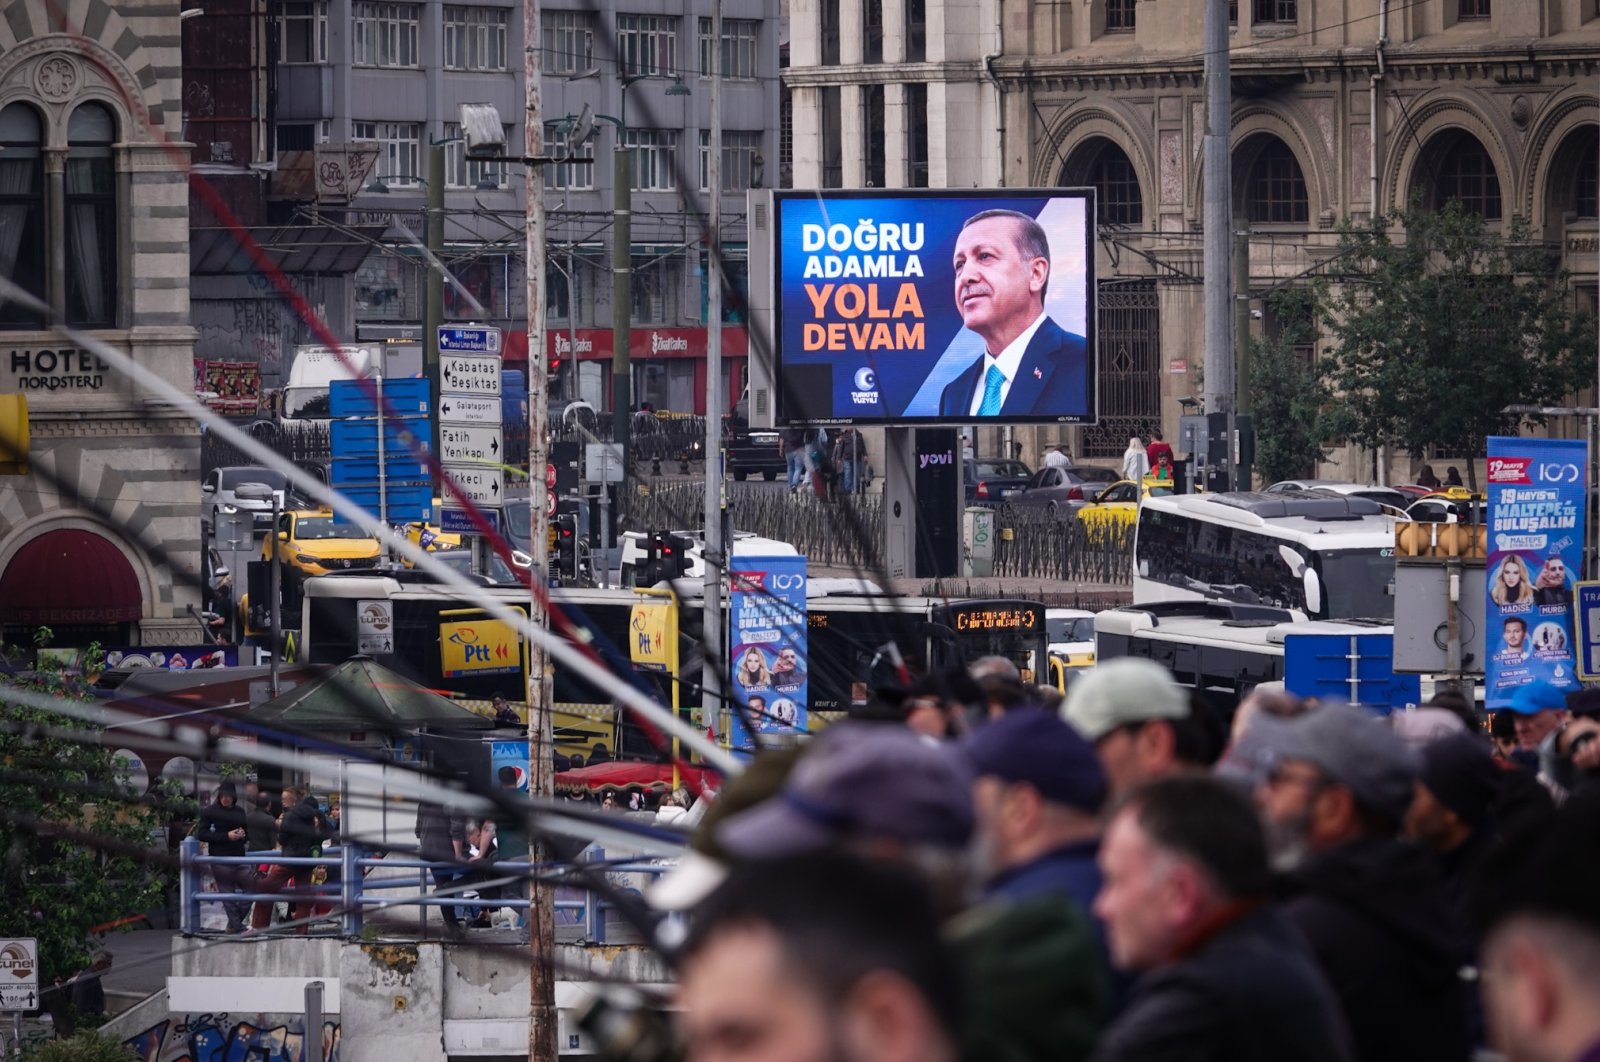 A picture of President Recep Tayyip Erdoğan is seen on a billboard on the Galata Bridge on Youth, Sports and Commemoration of Atatürk Day ahead of the presidential runoff on May 28, Istanbul, Türkiye, May 19, 2023. (Getty Images Photo)